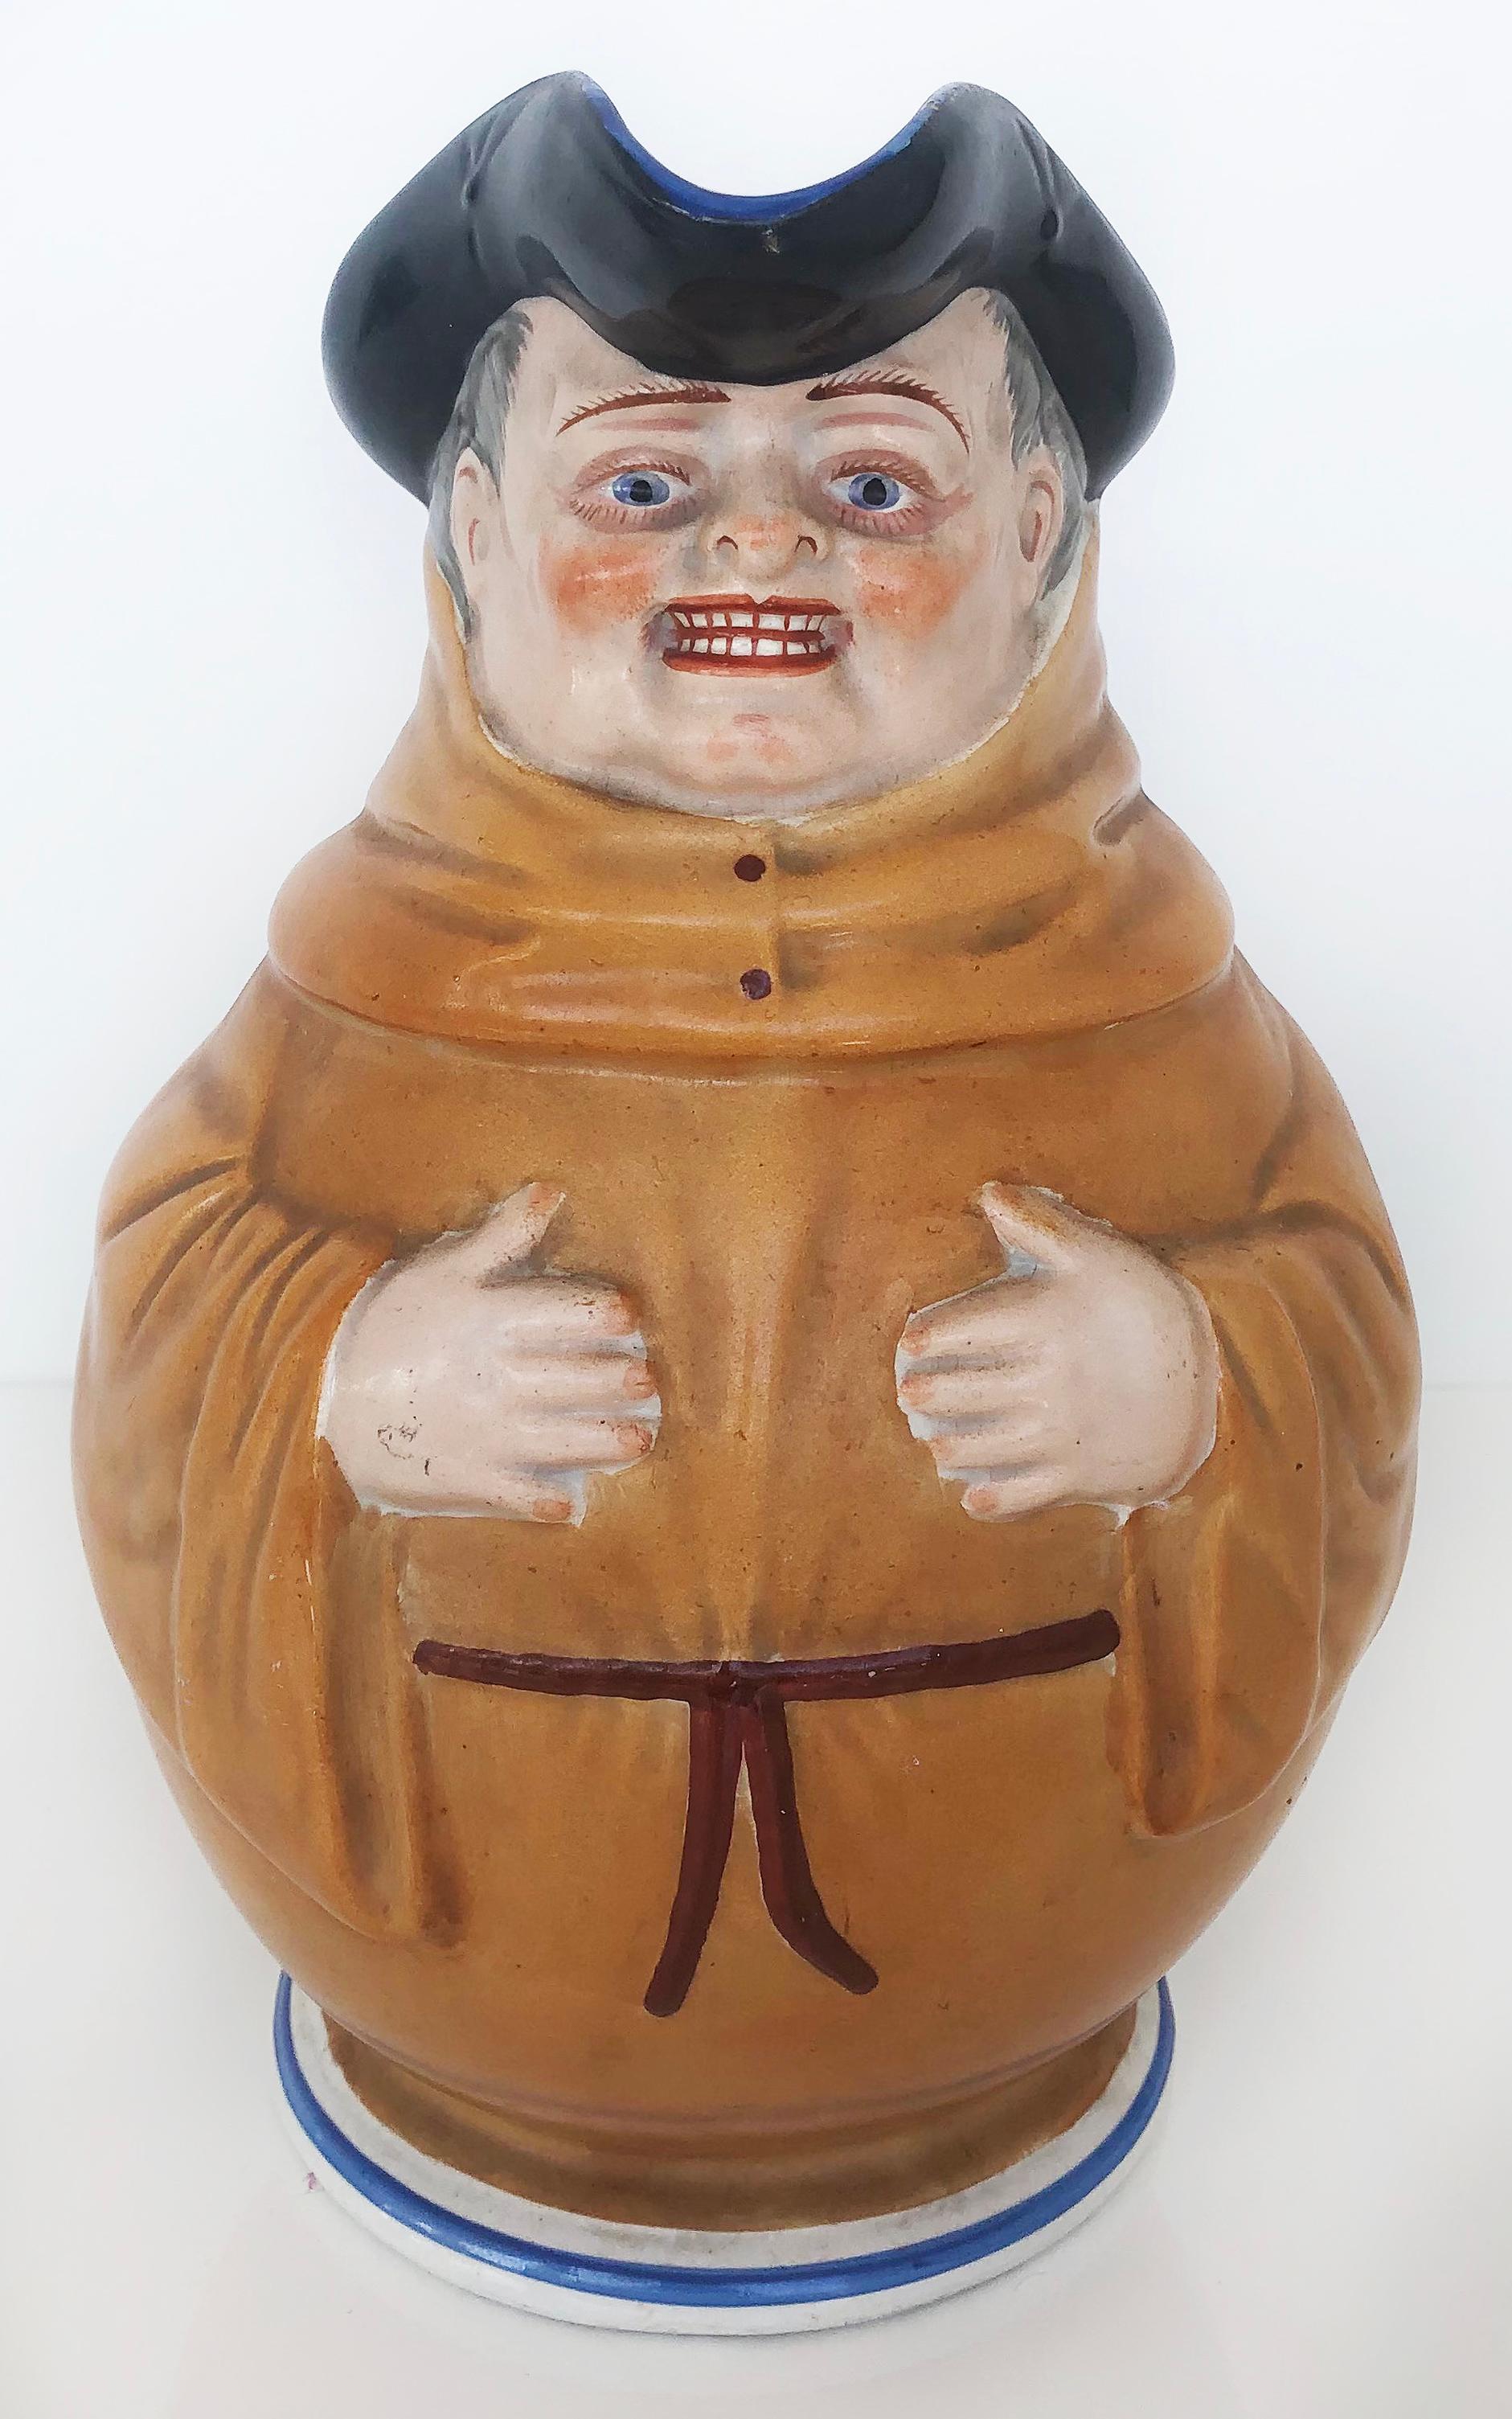 French Faience Creil Et Montereau Monk Pitcher, 19th Century, Signed 

Offered for sale is an antique French Creil et Montereau Monk Pitcher from the late 19th century. The pitcher has a handle on the back and a spout within the friar's hat. The